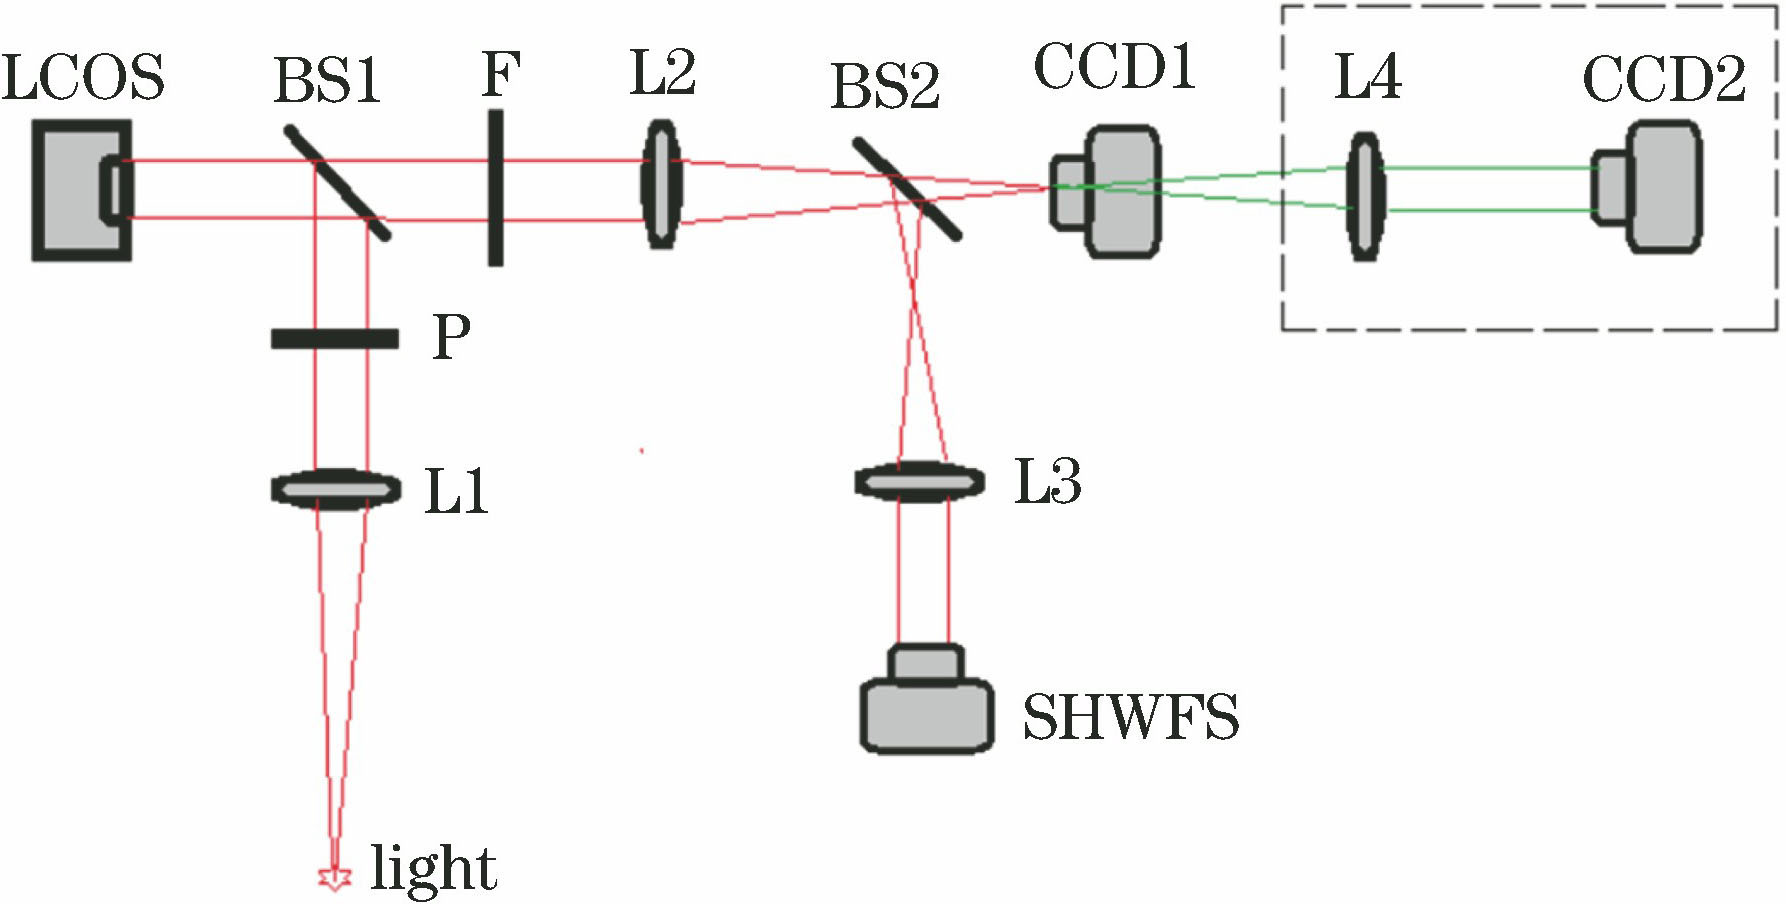 Adaptive optical system of LCSLM